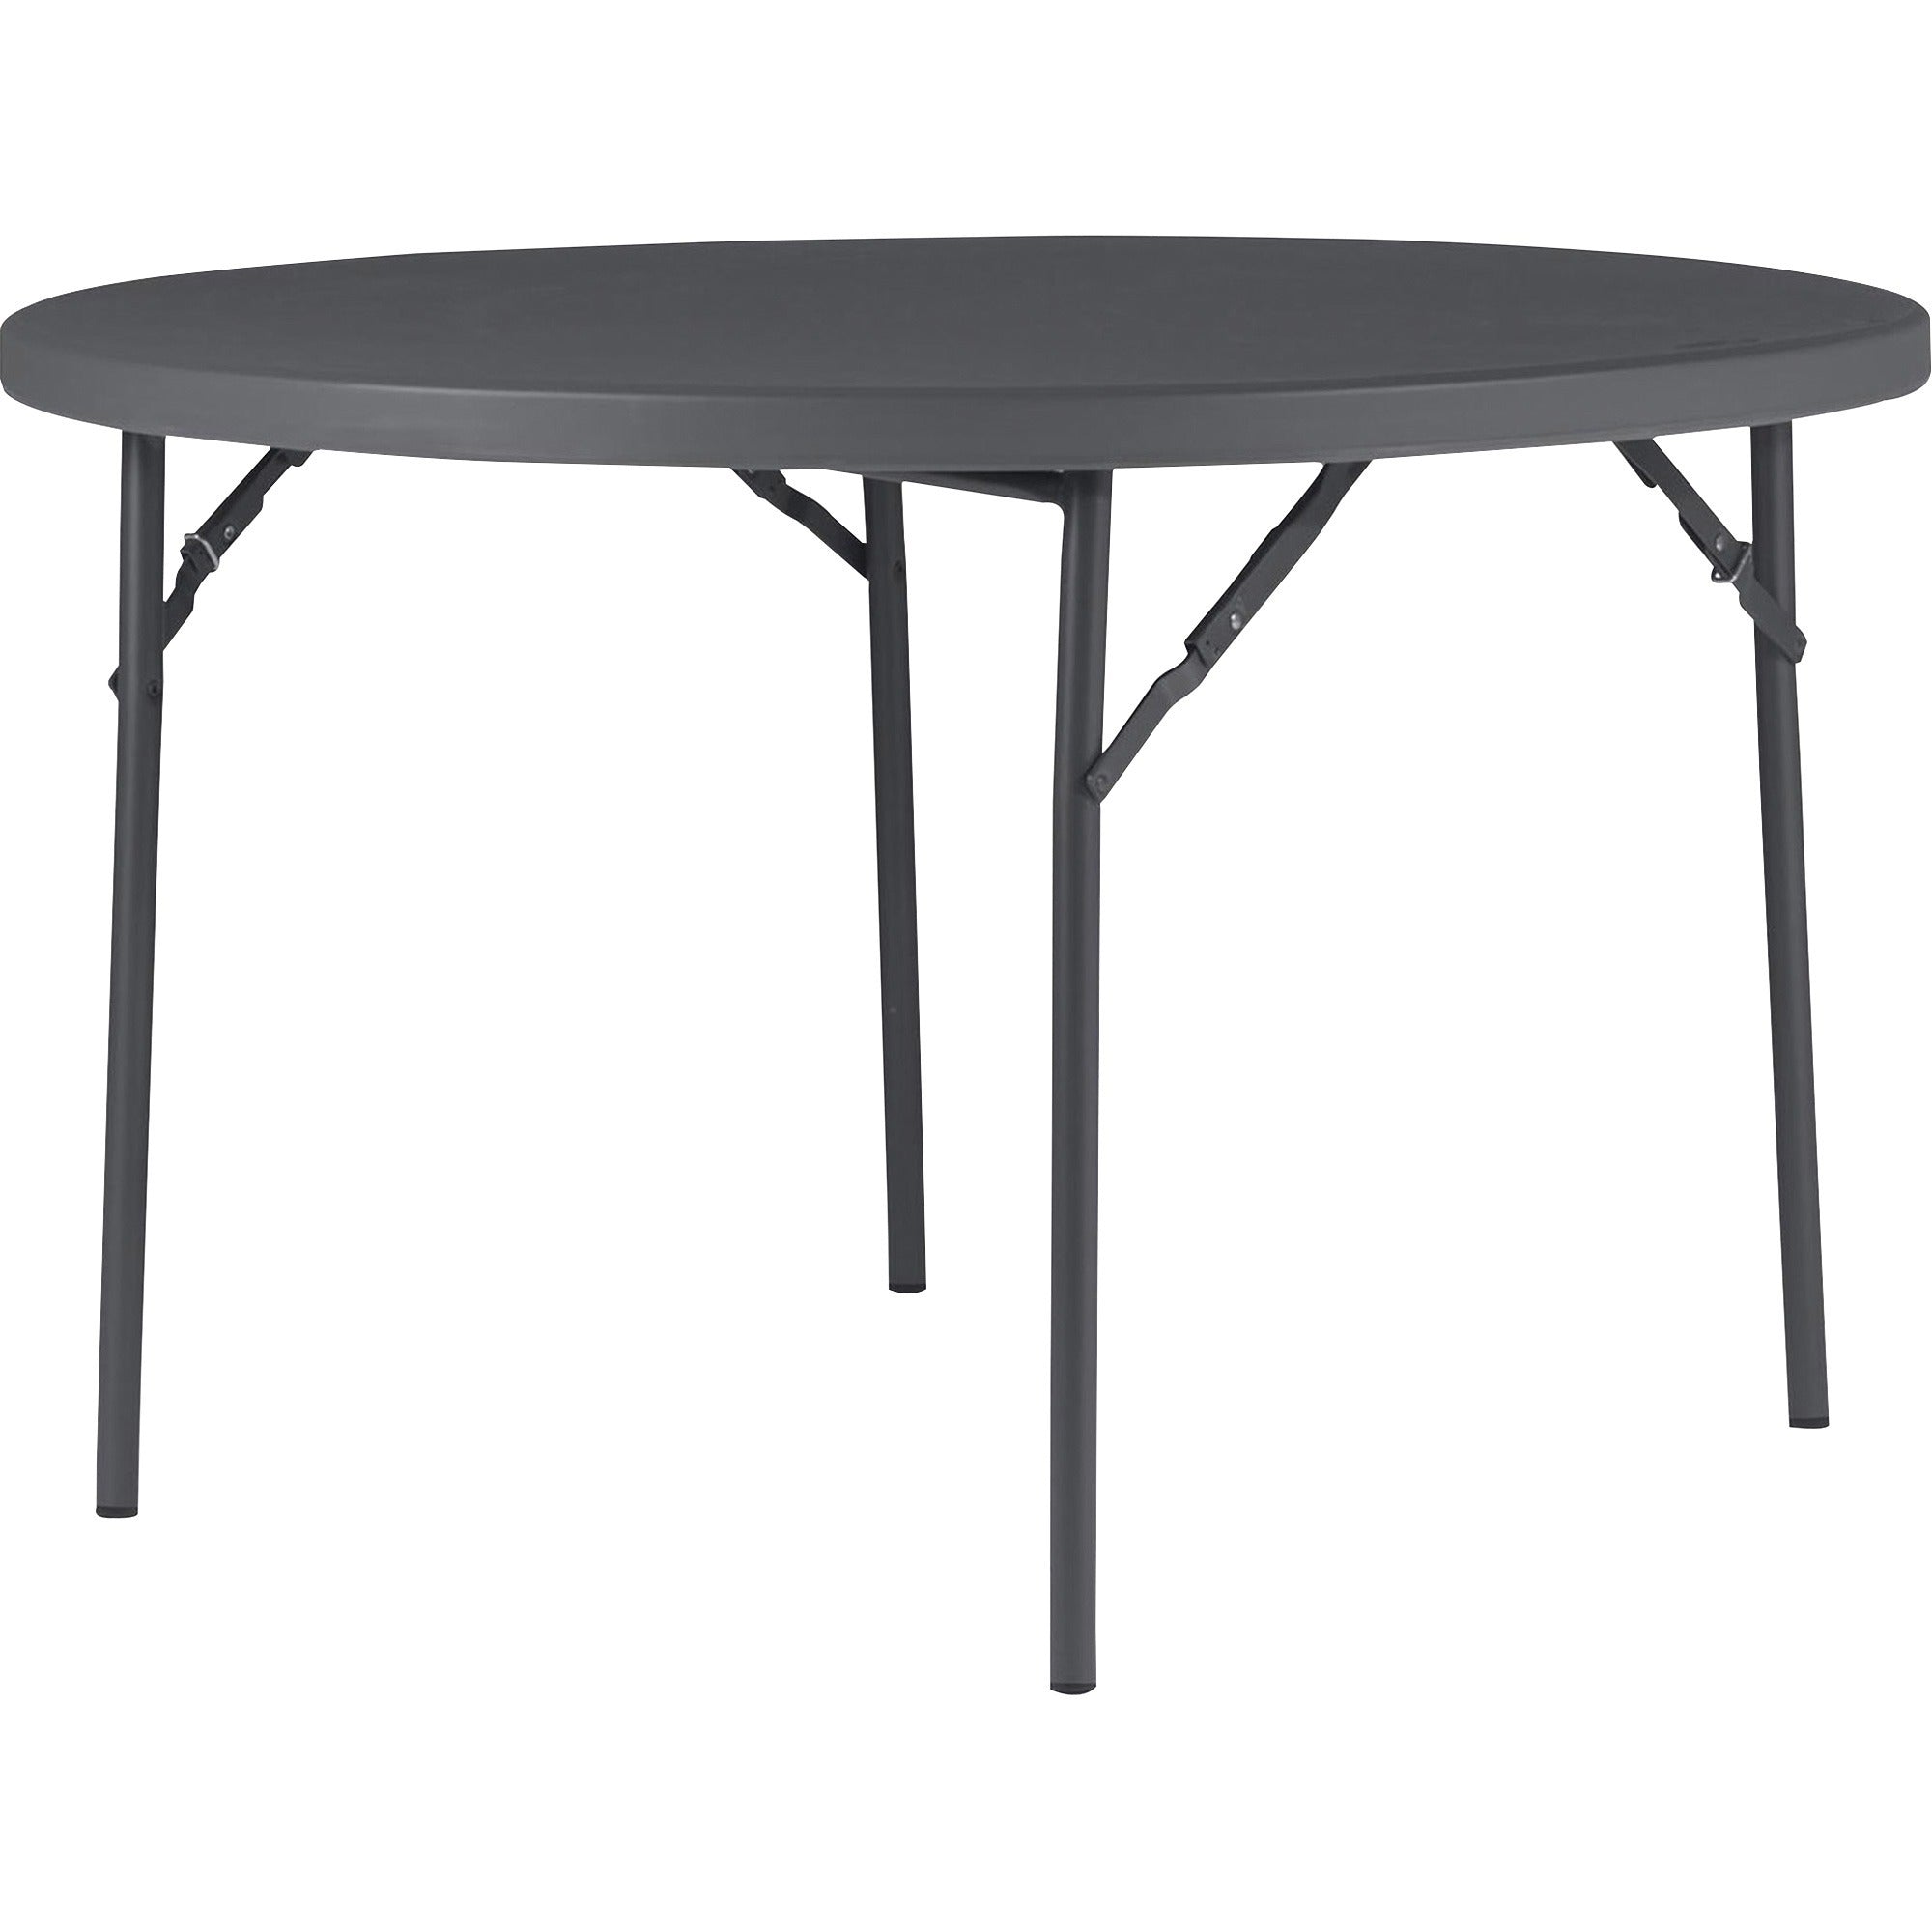 Dorel Zown Commercial Round Blow Mold Fold Table - For - Table TopRound Top - 4 Legs - 750 lb Capacity x 48" Table Top Diameter - 29.30" Height - Gray - High-density Polyethylene (HDPE), Resin - 1 Each - 1